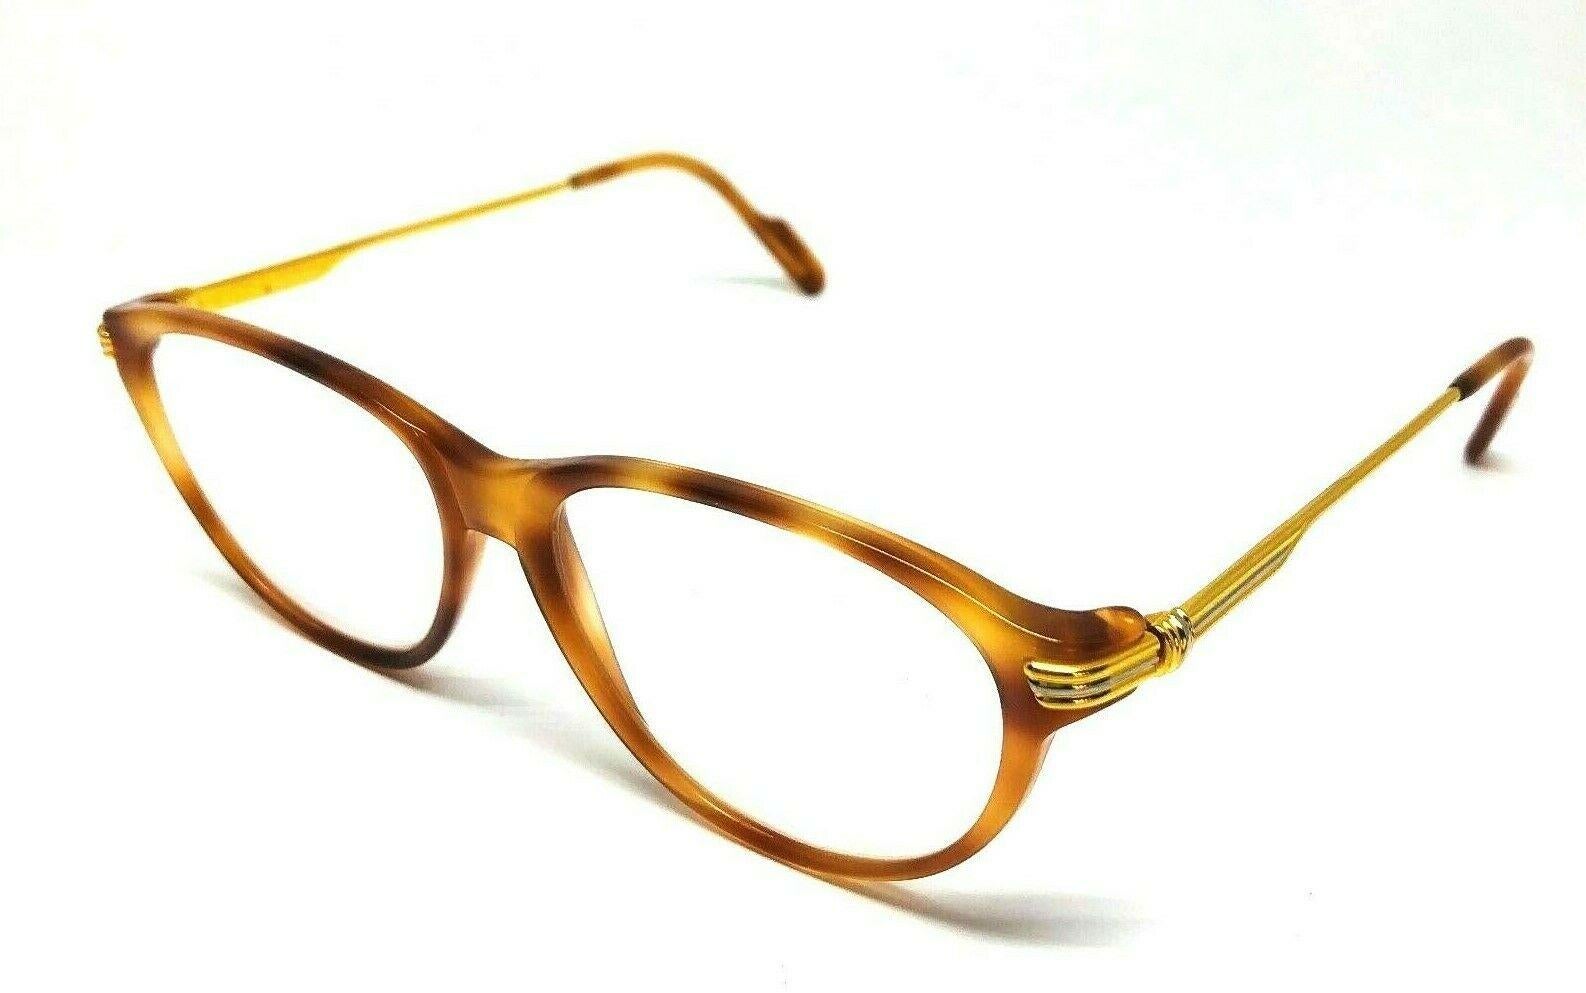 CARTIER Must De Lunettes Eyewear Glasses w/ Original Box Paris

Color: Light brown, signature yellow and white gold details on the sides

Measurements: 5.25”W x 1.75”H

Details: The eyewear is signed by Cartier Paris; it is stamped with the serial #